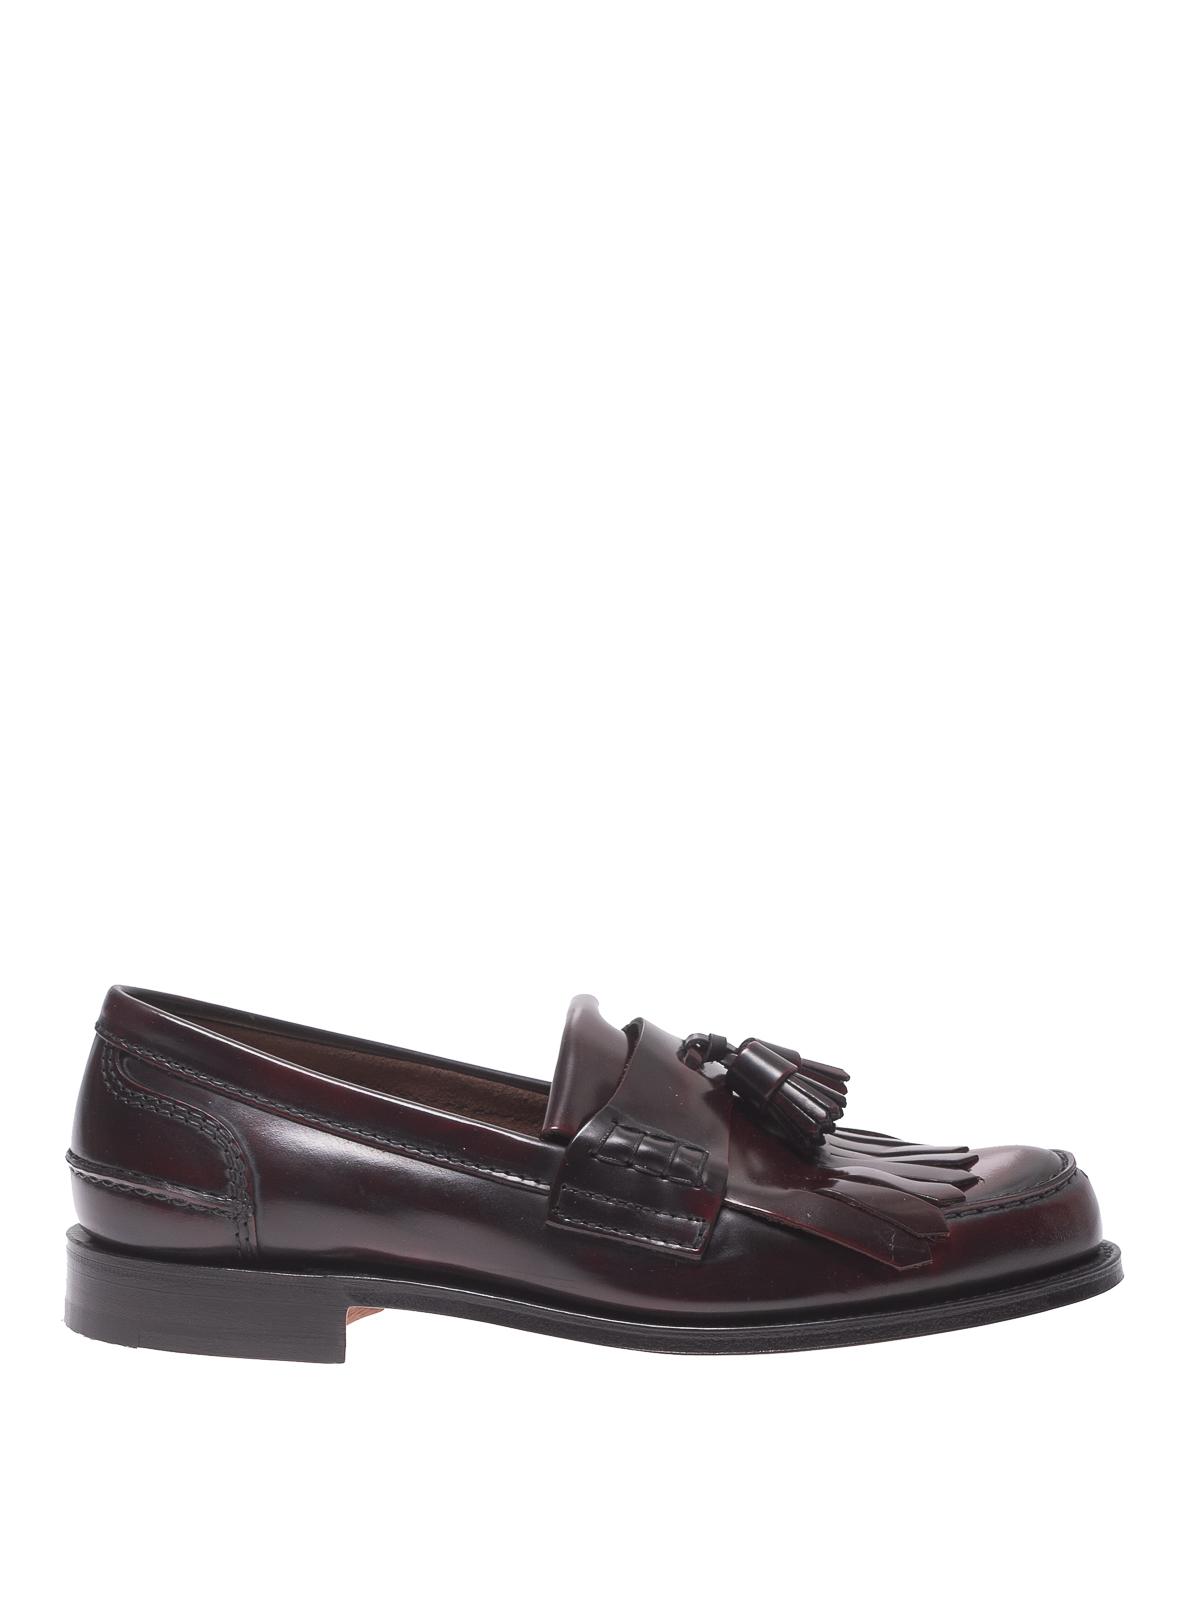 Church's Oreham Polished Leather Tasselled Loafers in Burgundy (Black ...